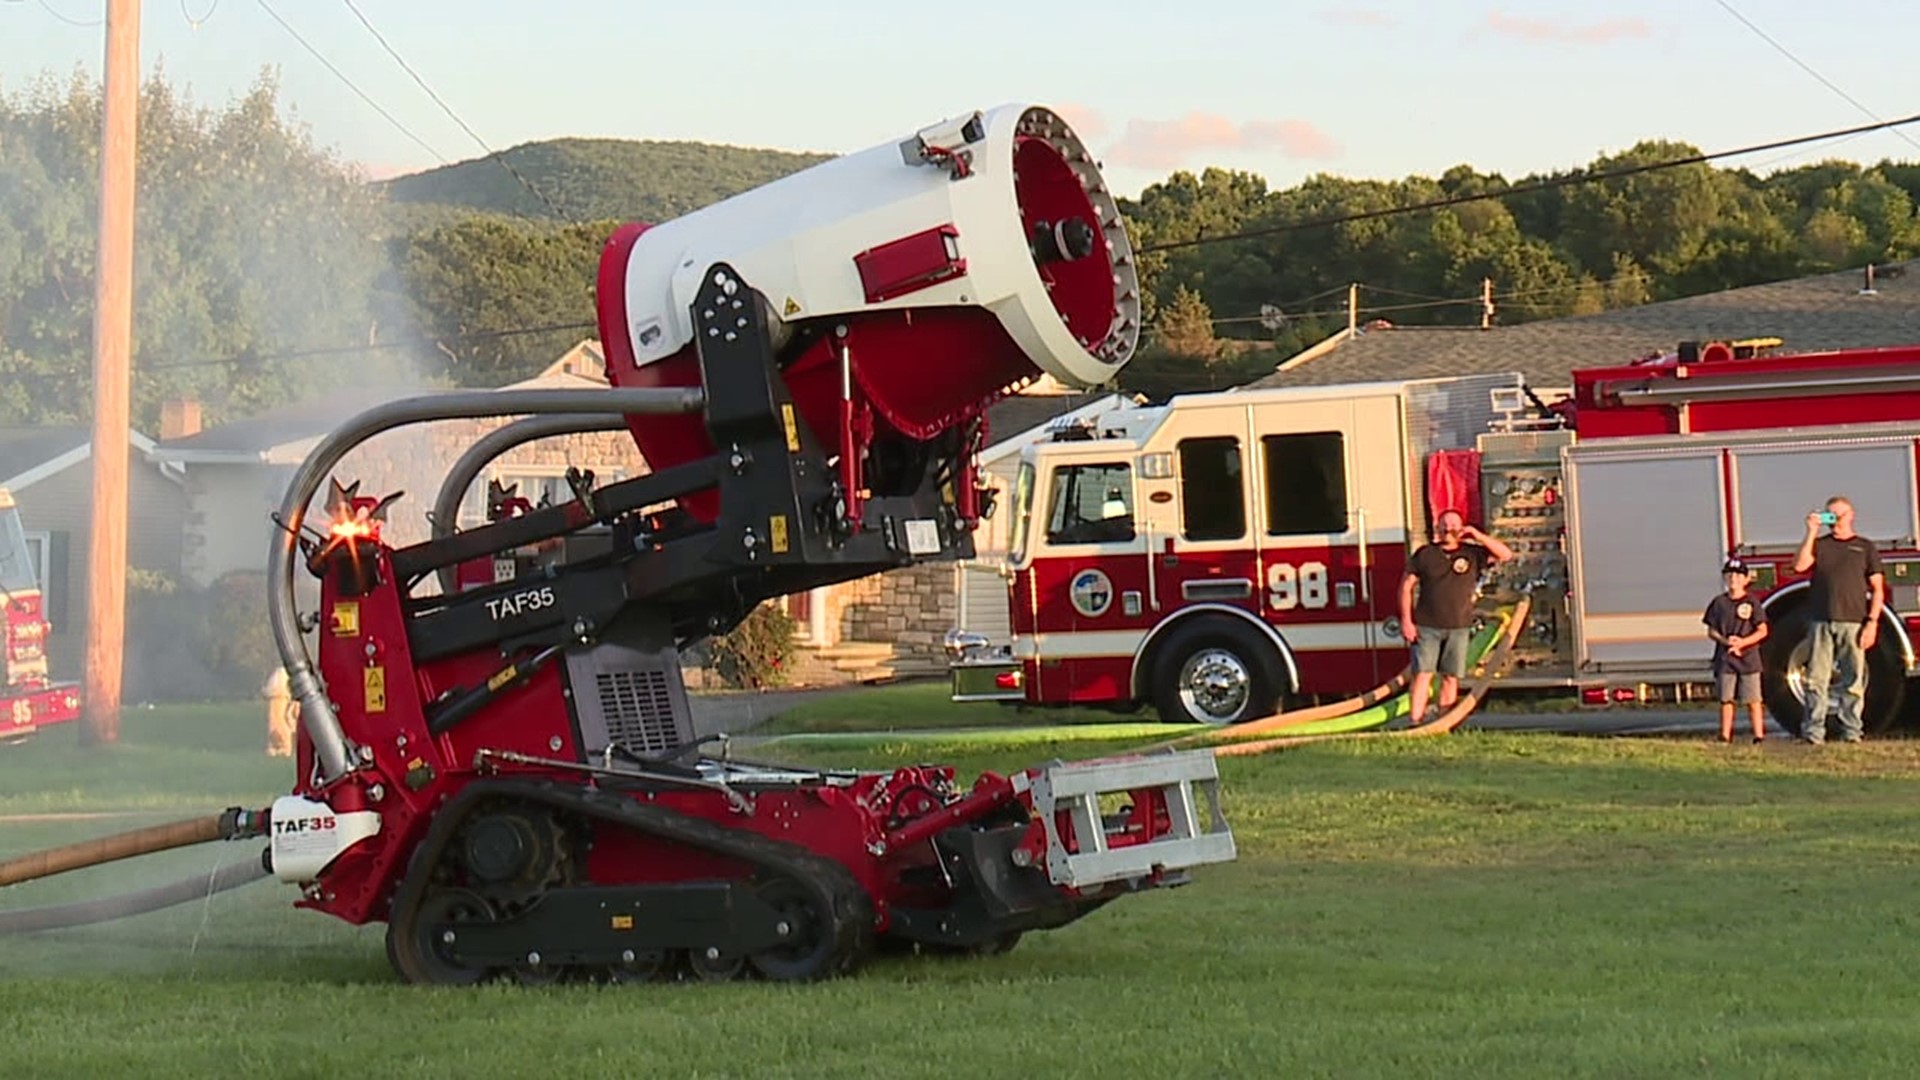 Firefighters gathered Tuesday night in Moosic to see what the machine can do. Newswatch 16's Jack Culkin spoke to them about the benefits the robot would bring.